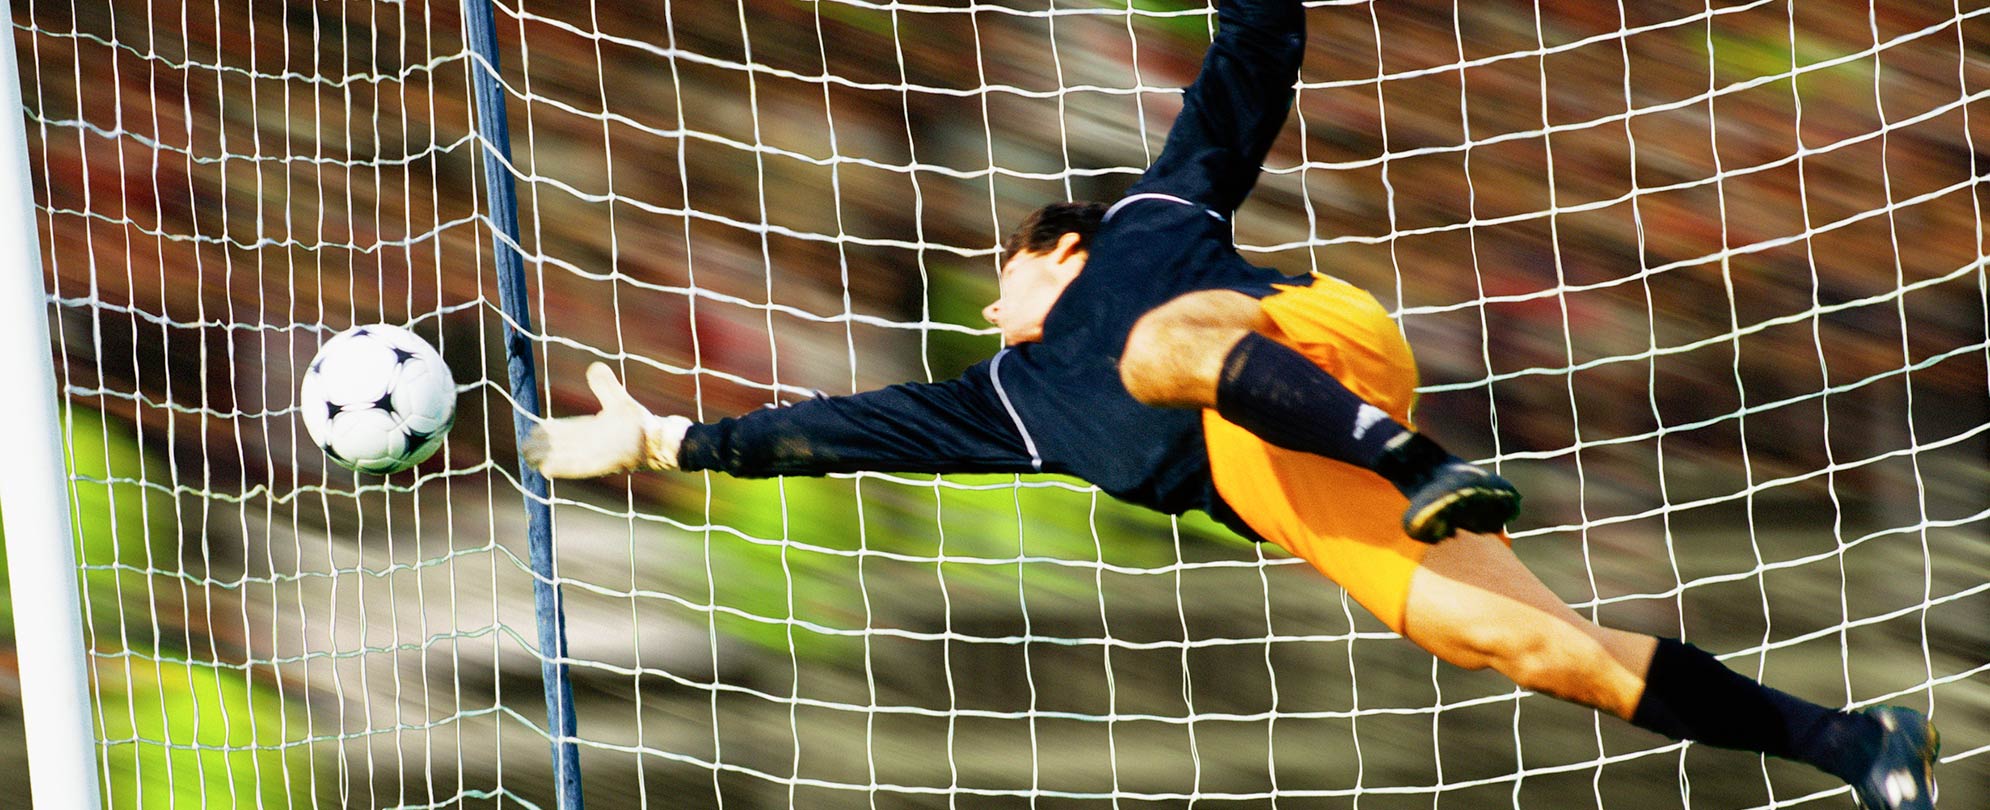 A soccer goalie jumping to reach a soccer ball flying into the net	